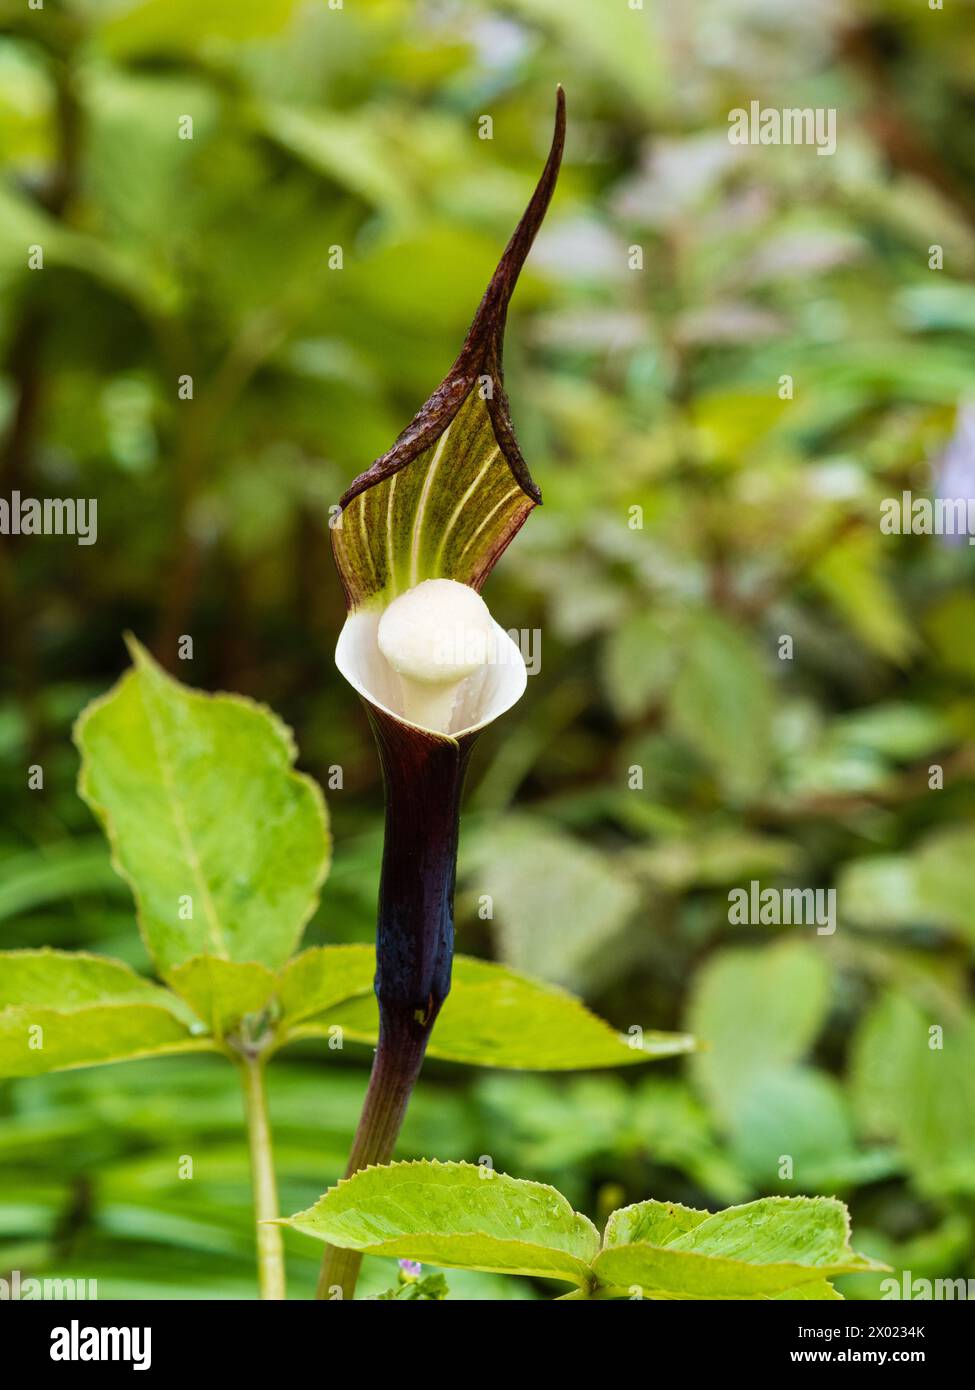 Exotic brown, hooded spathe and white interior and spadix of the hardy, spring flowering, woodland Japanese cobra lily, Arisaema sikokianum Stock Photo